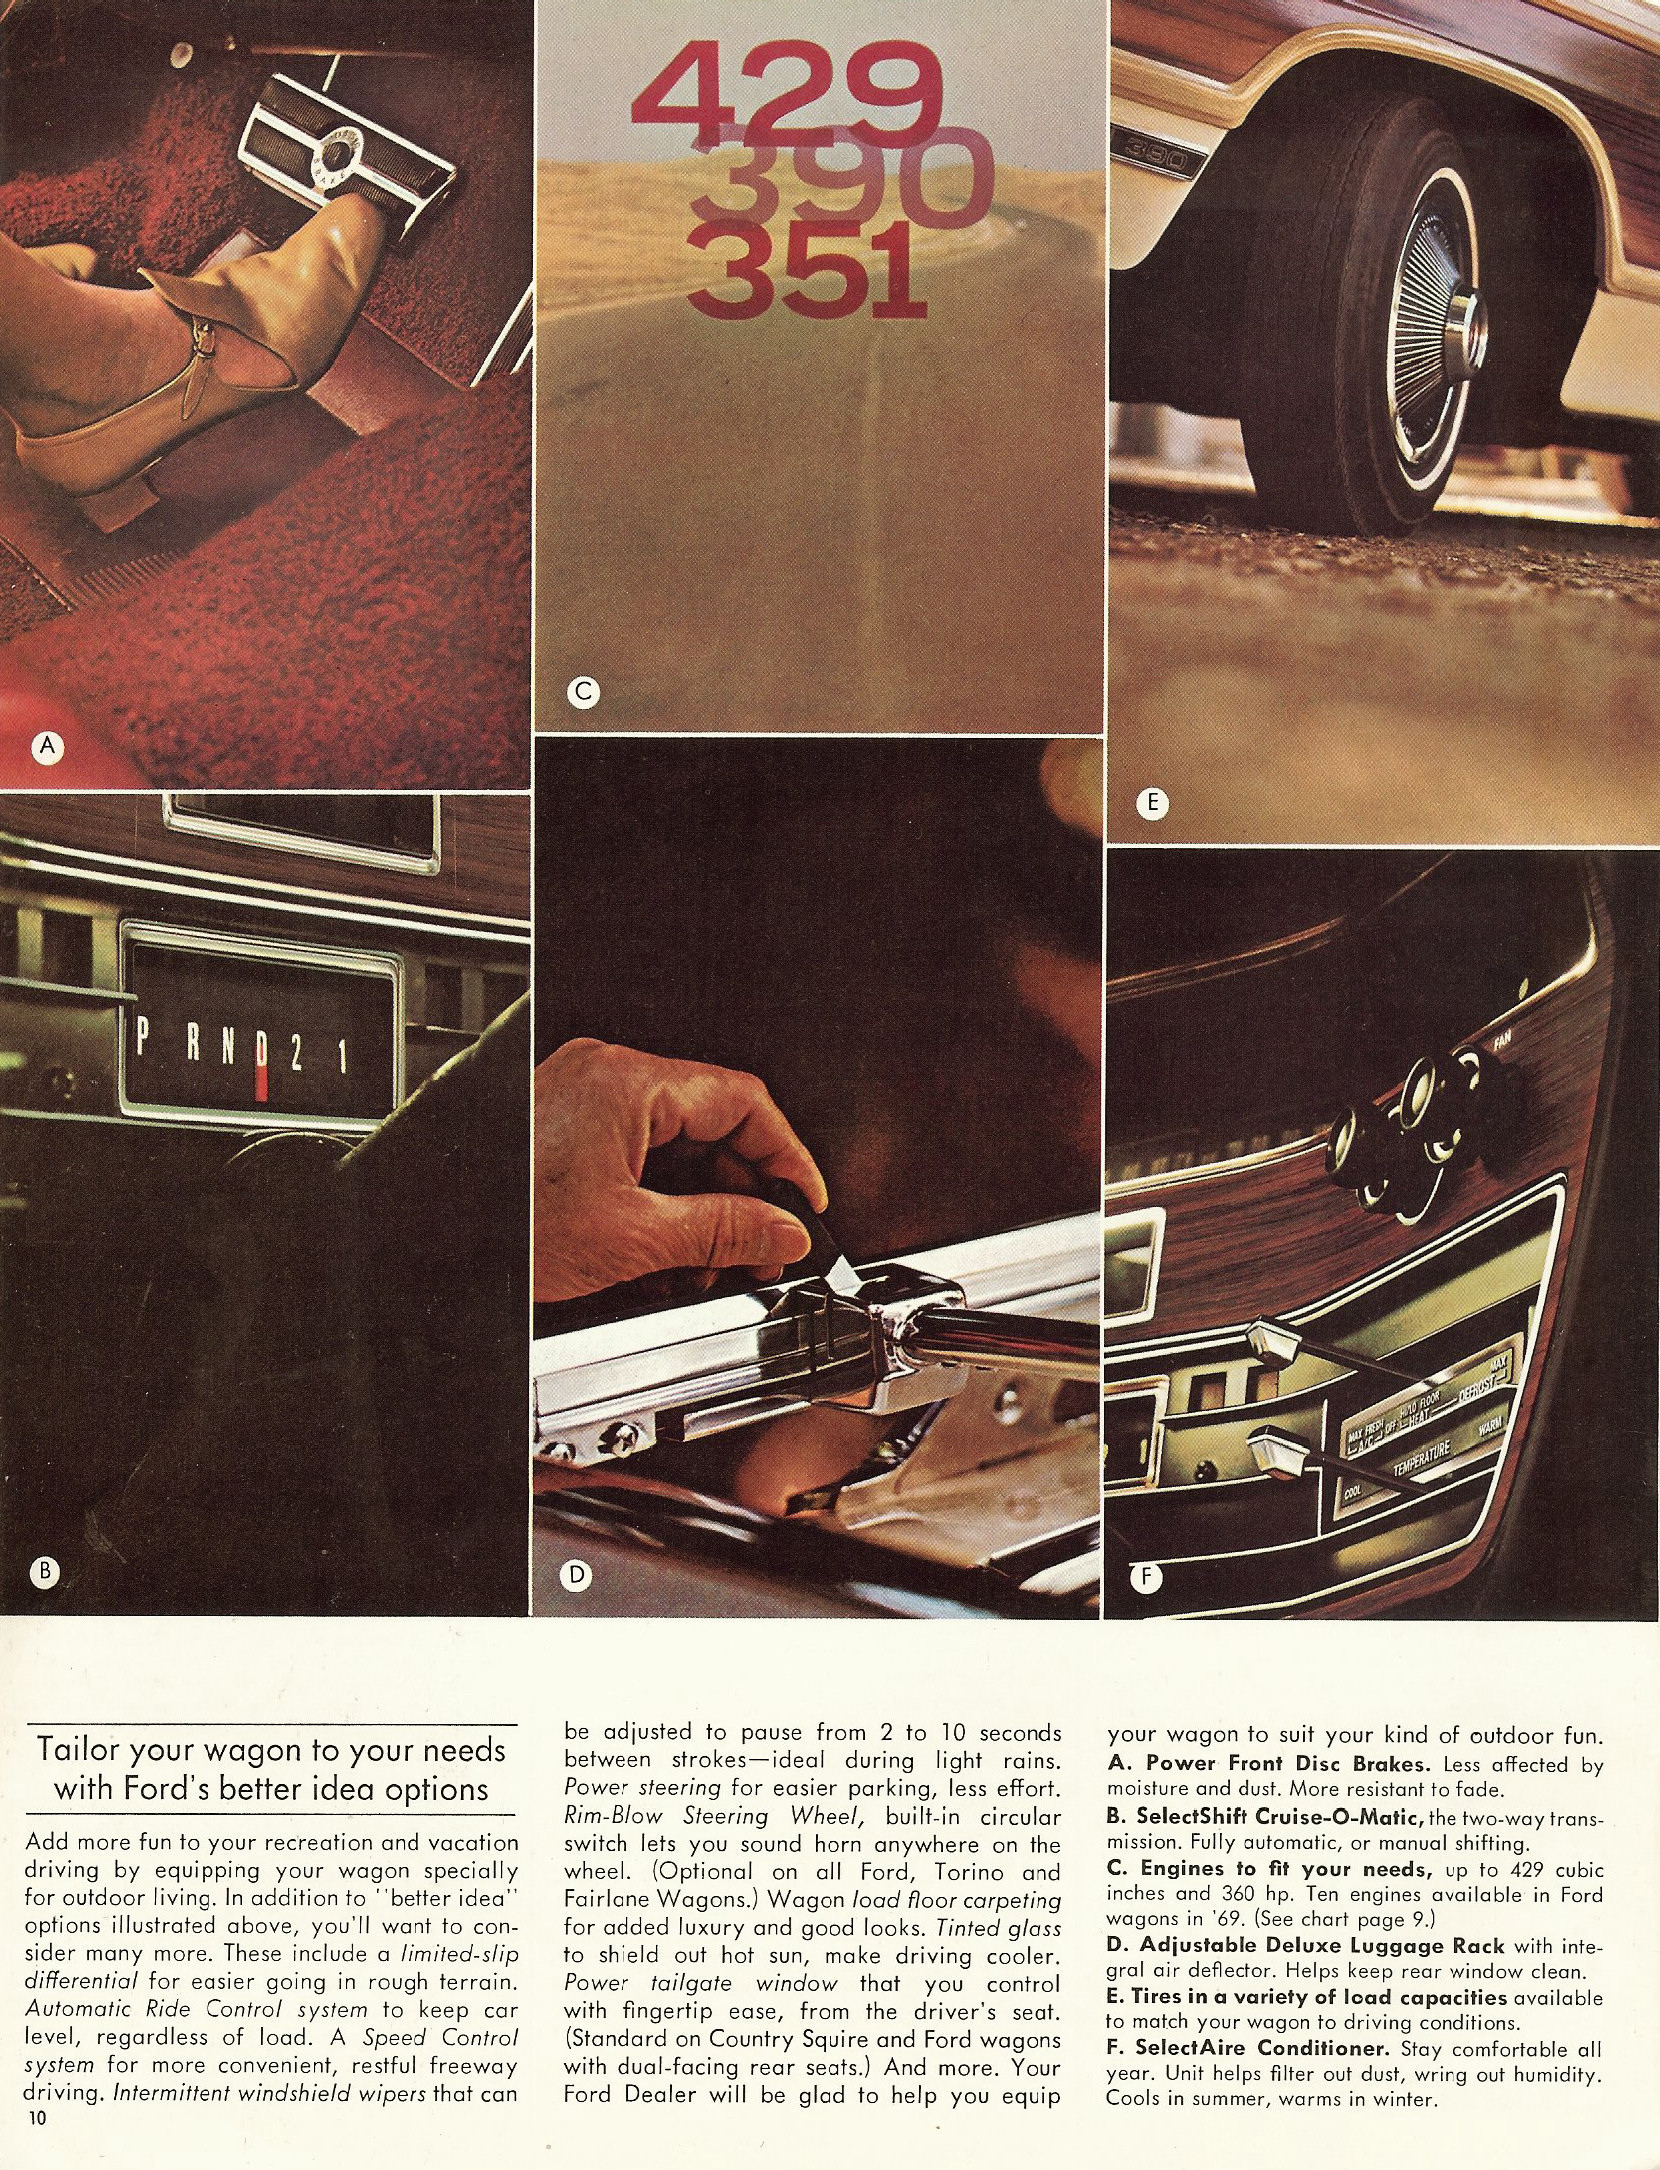 1969 Ford Wagons Brochure Page 6